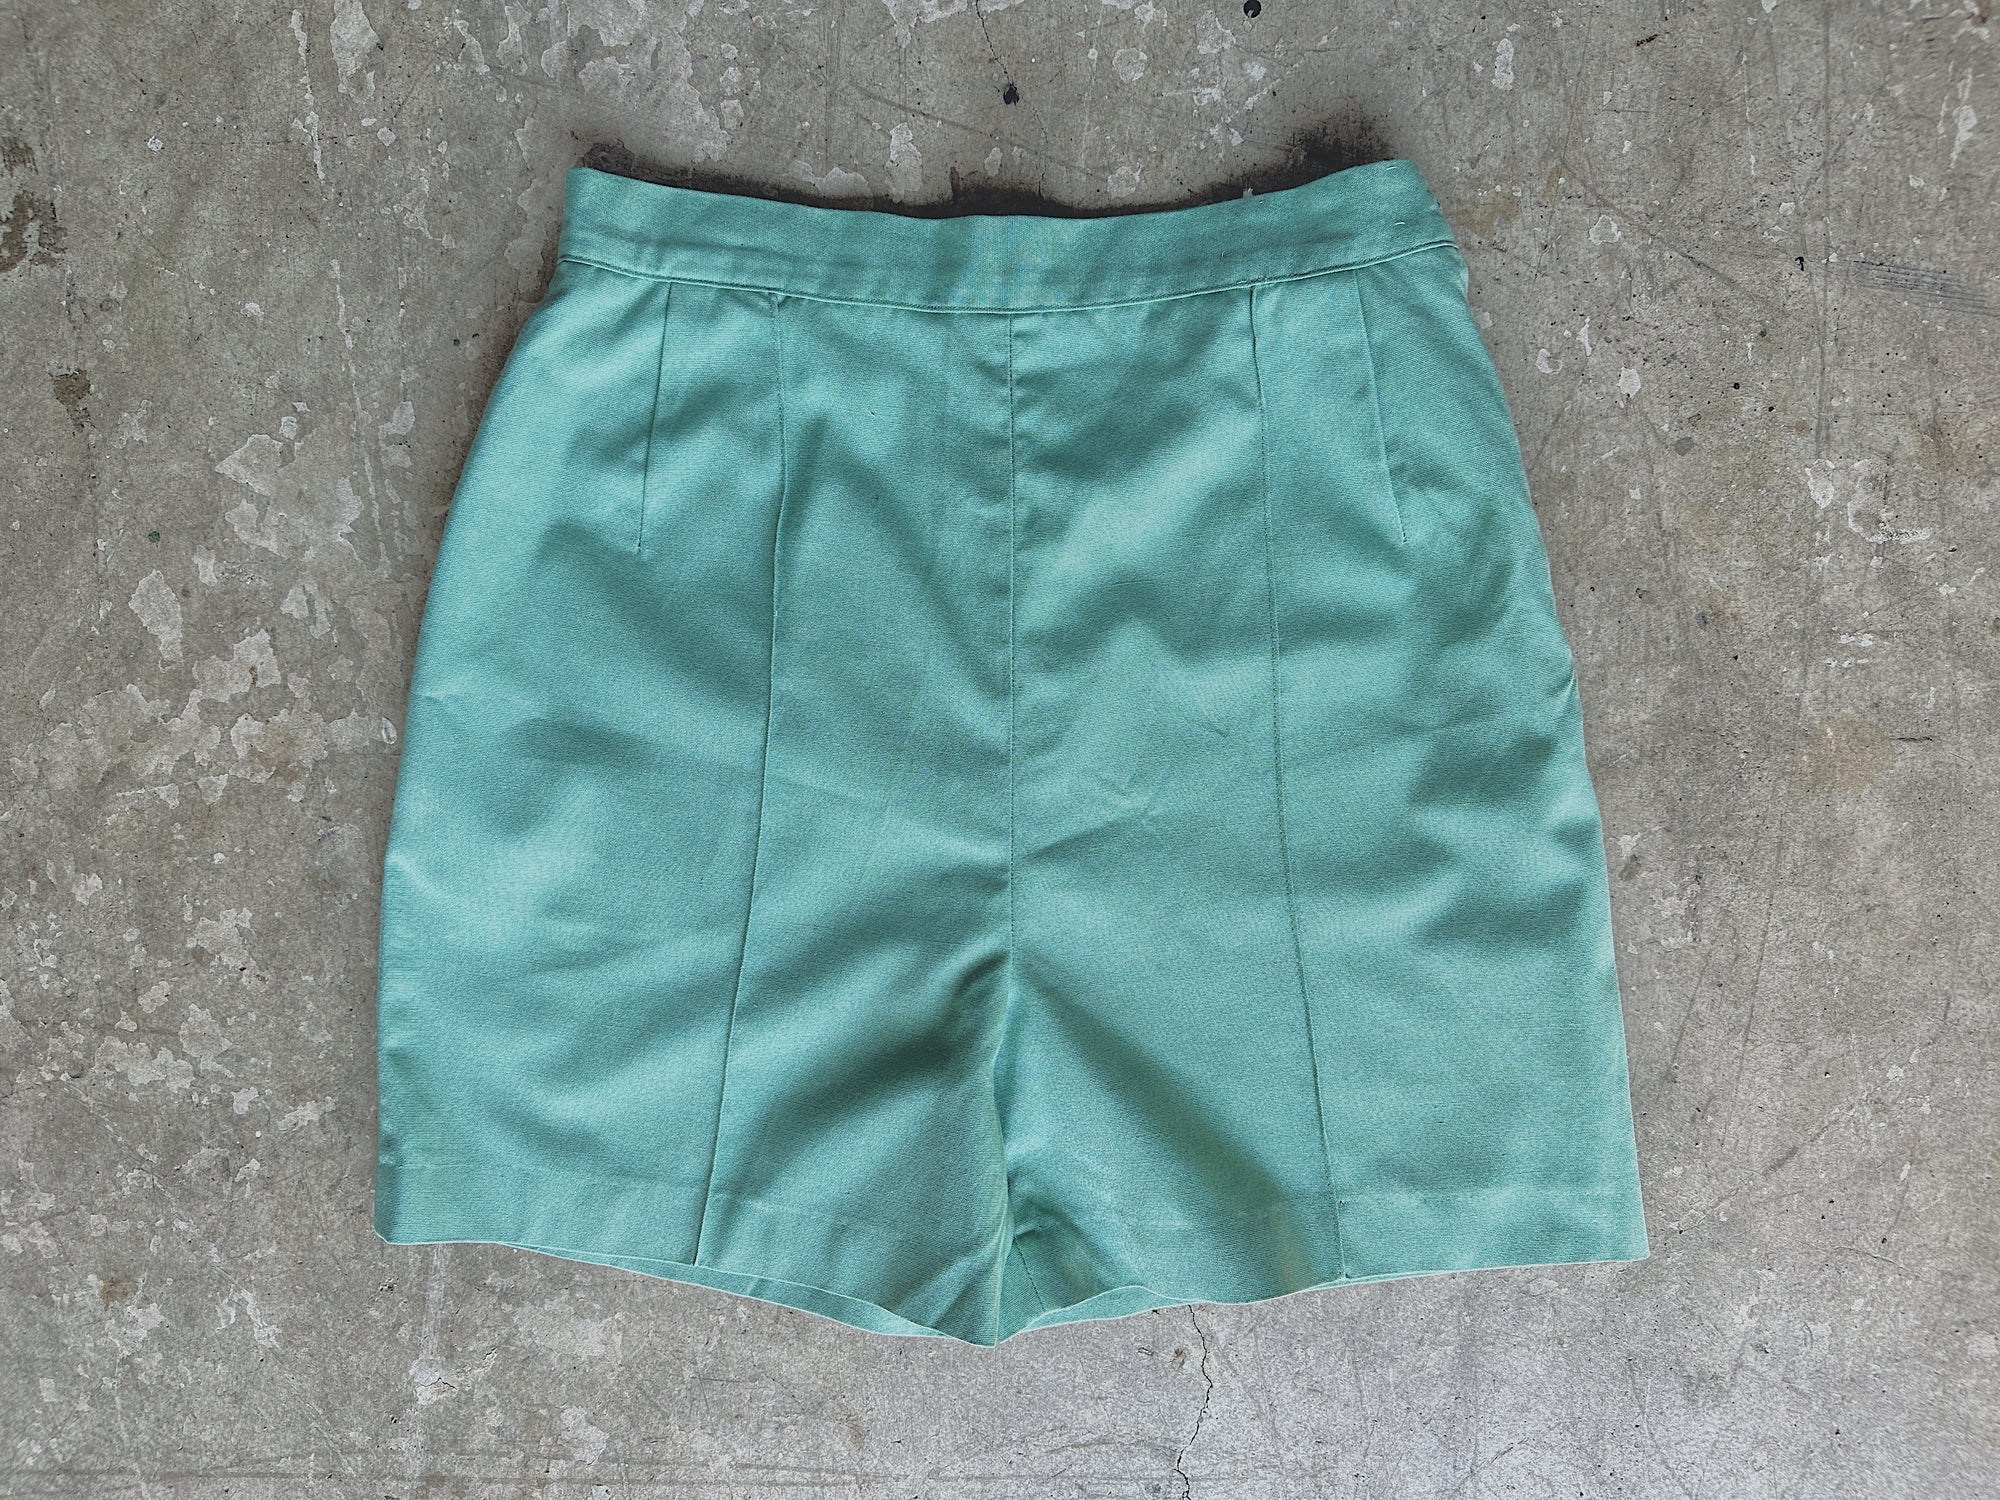 1970s Teal Shorts